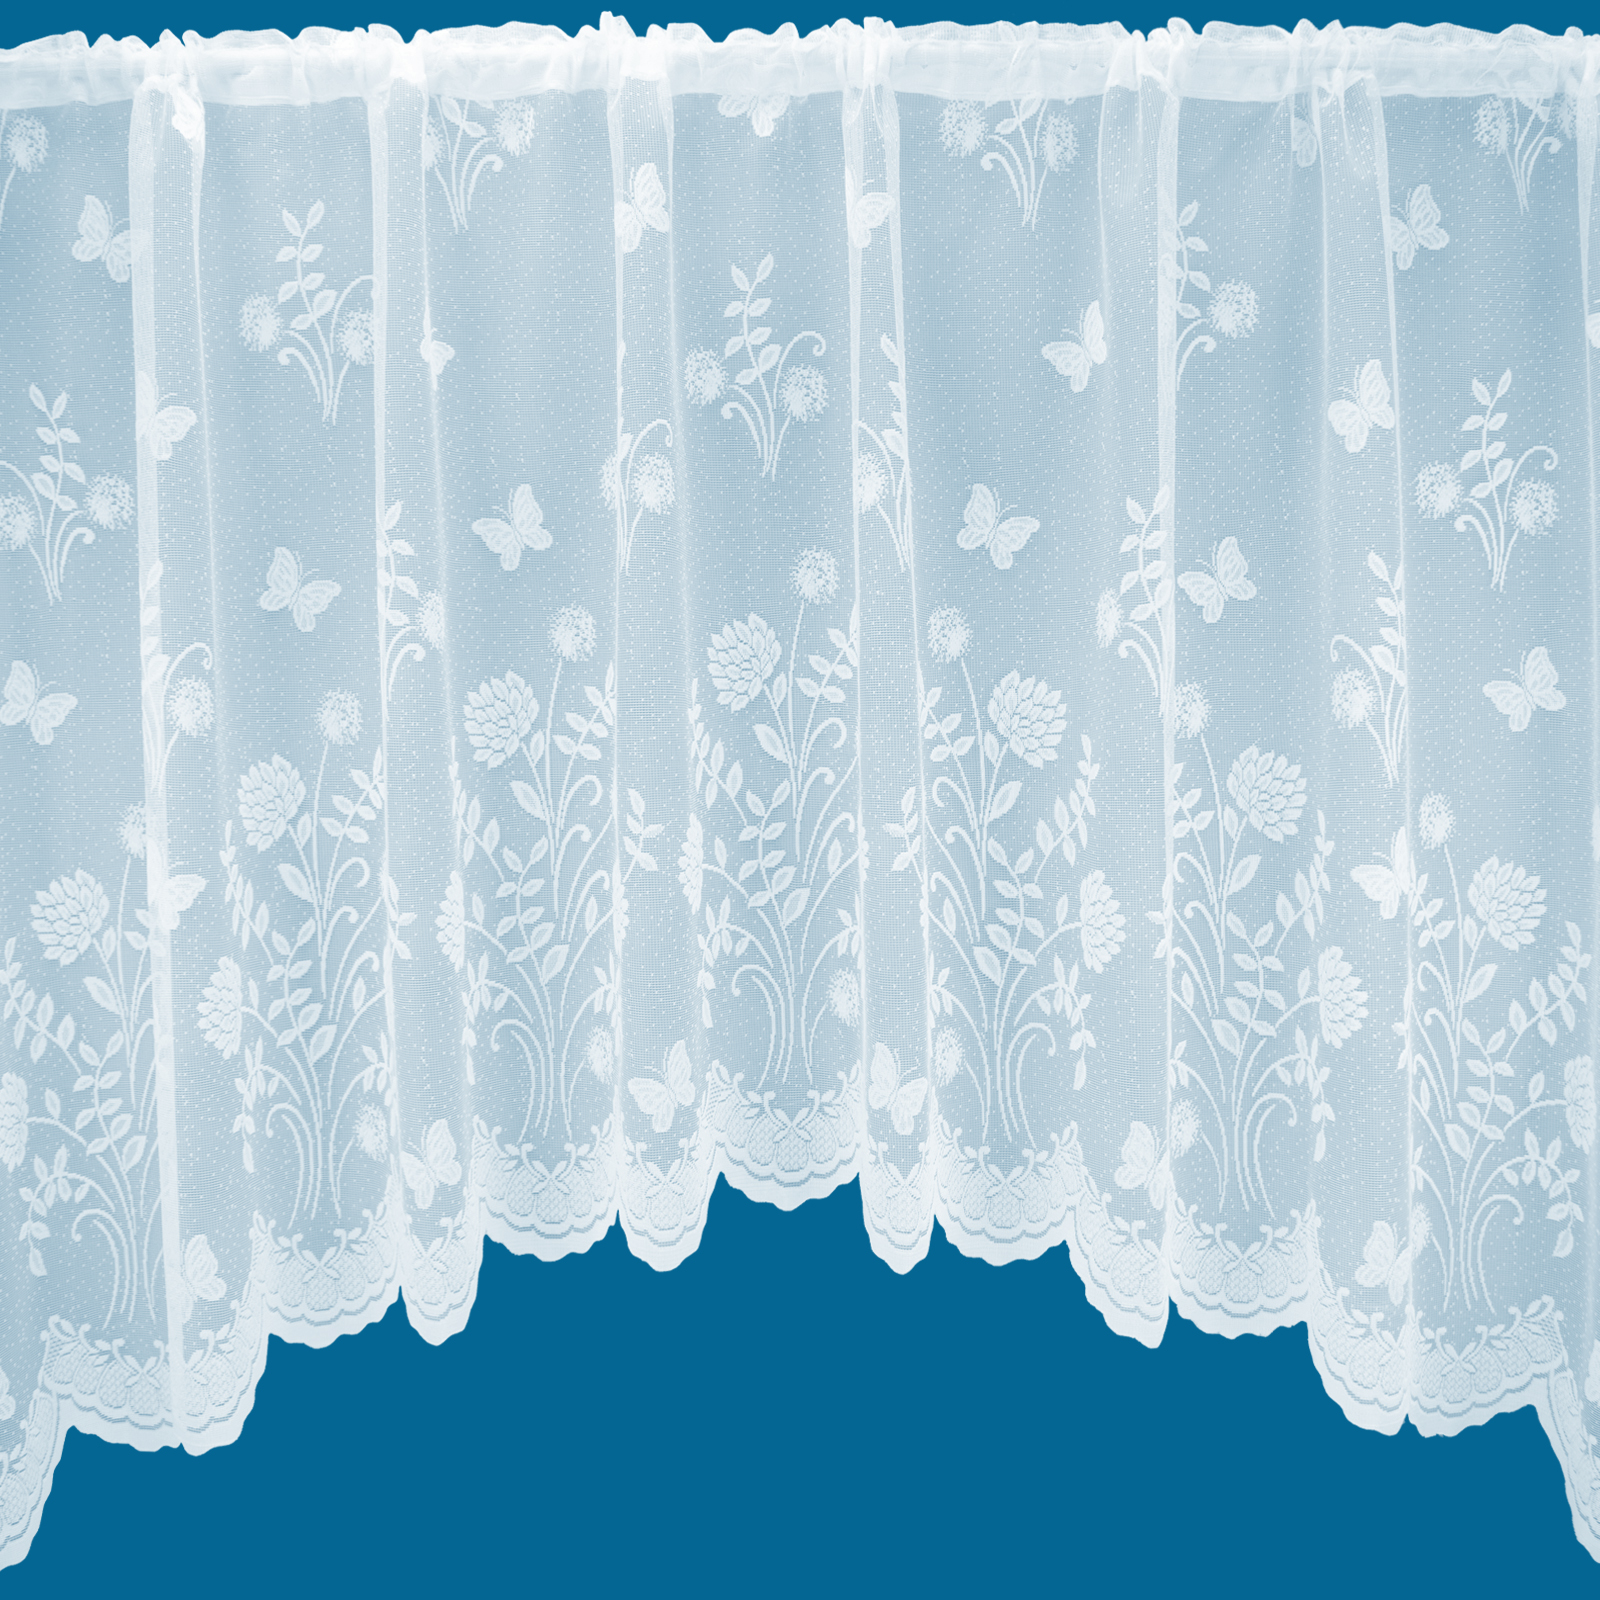 Jardiniere Meadow Lace Net Curtain ShawsDirect Ready to Hang Best